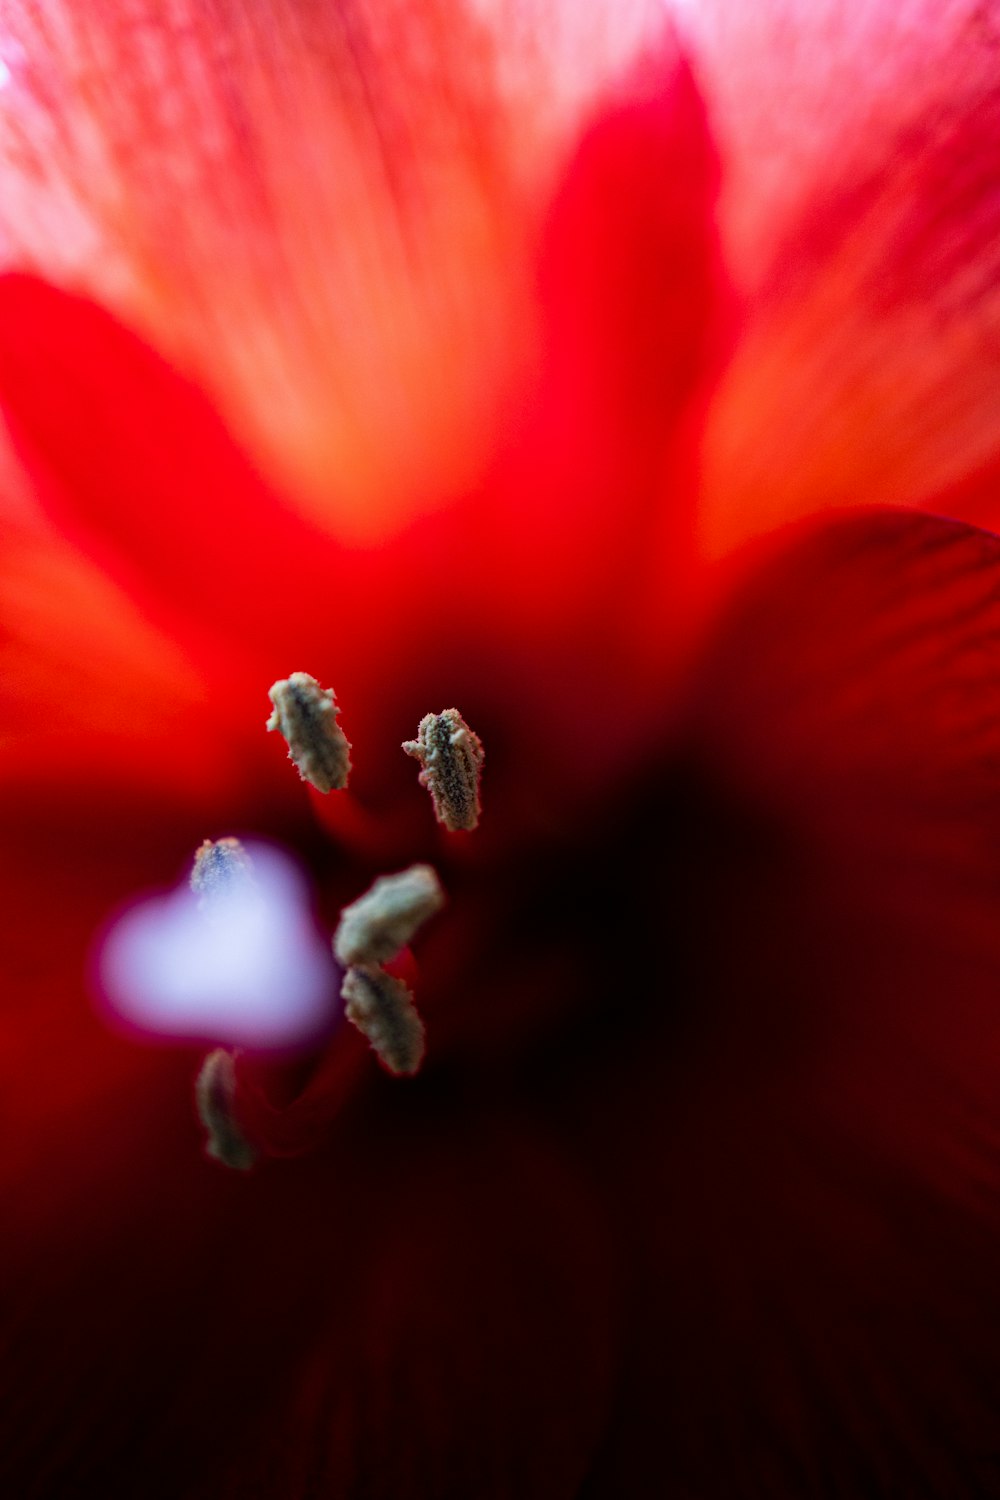 red and yellow flower in macro photography